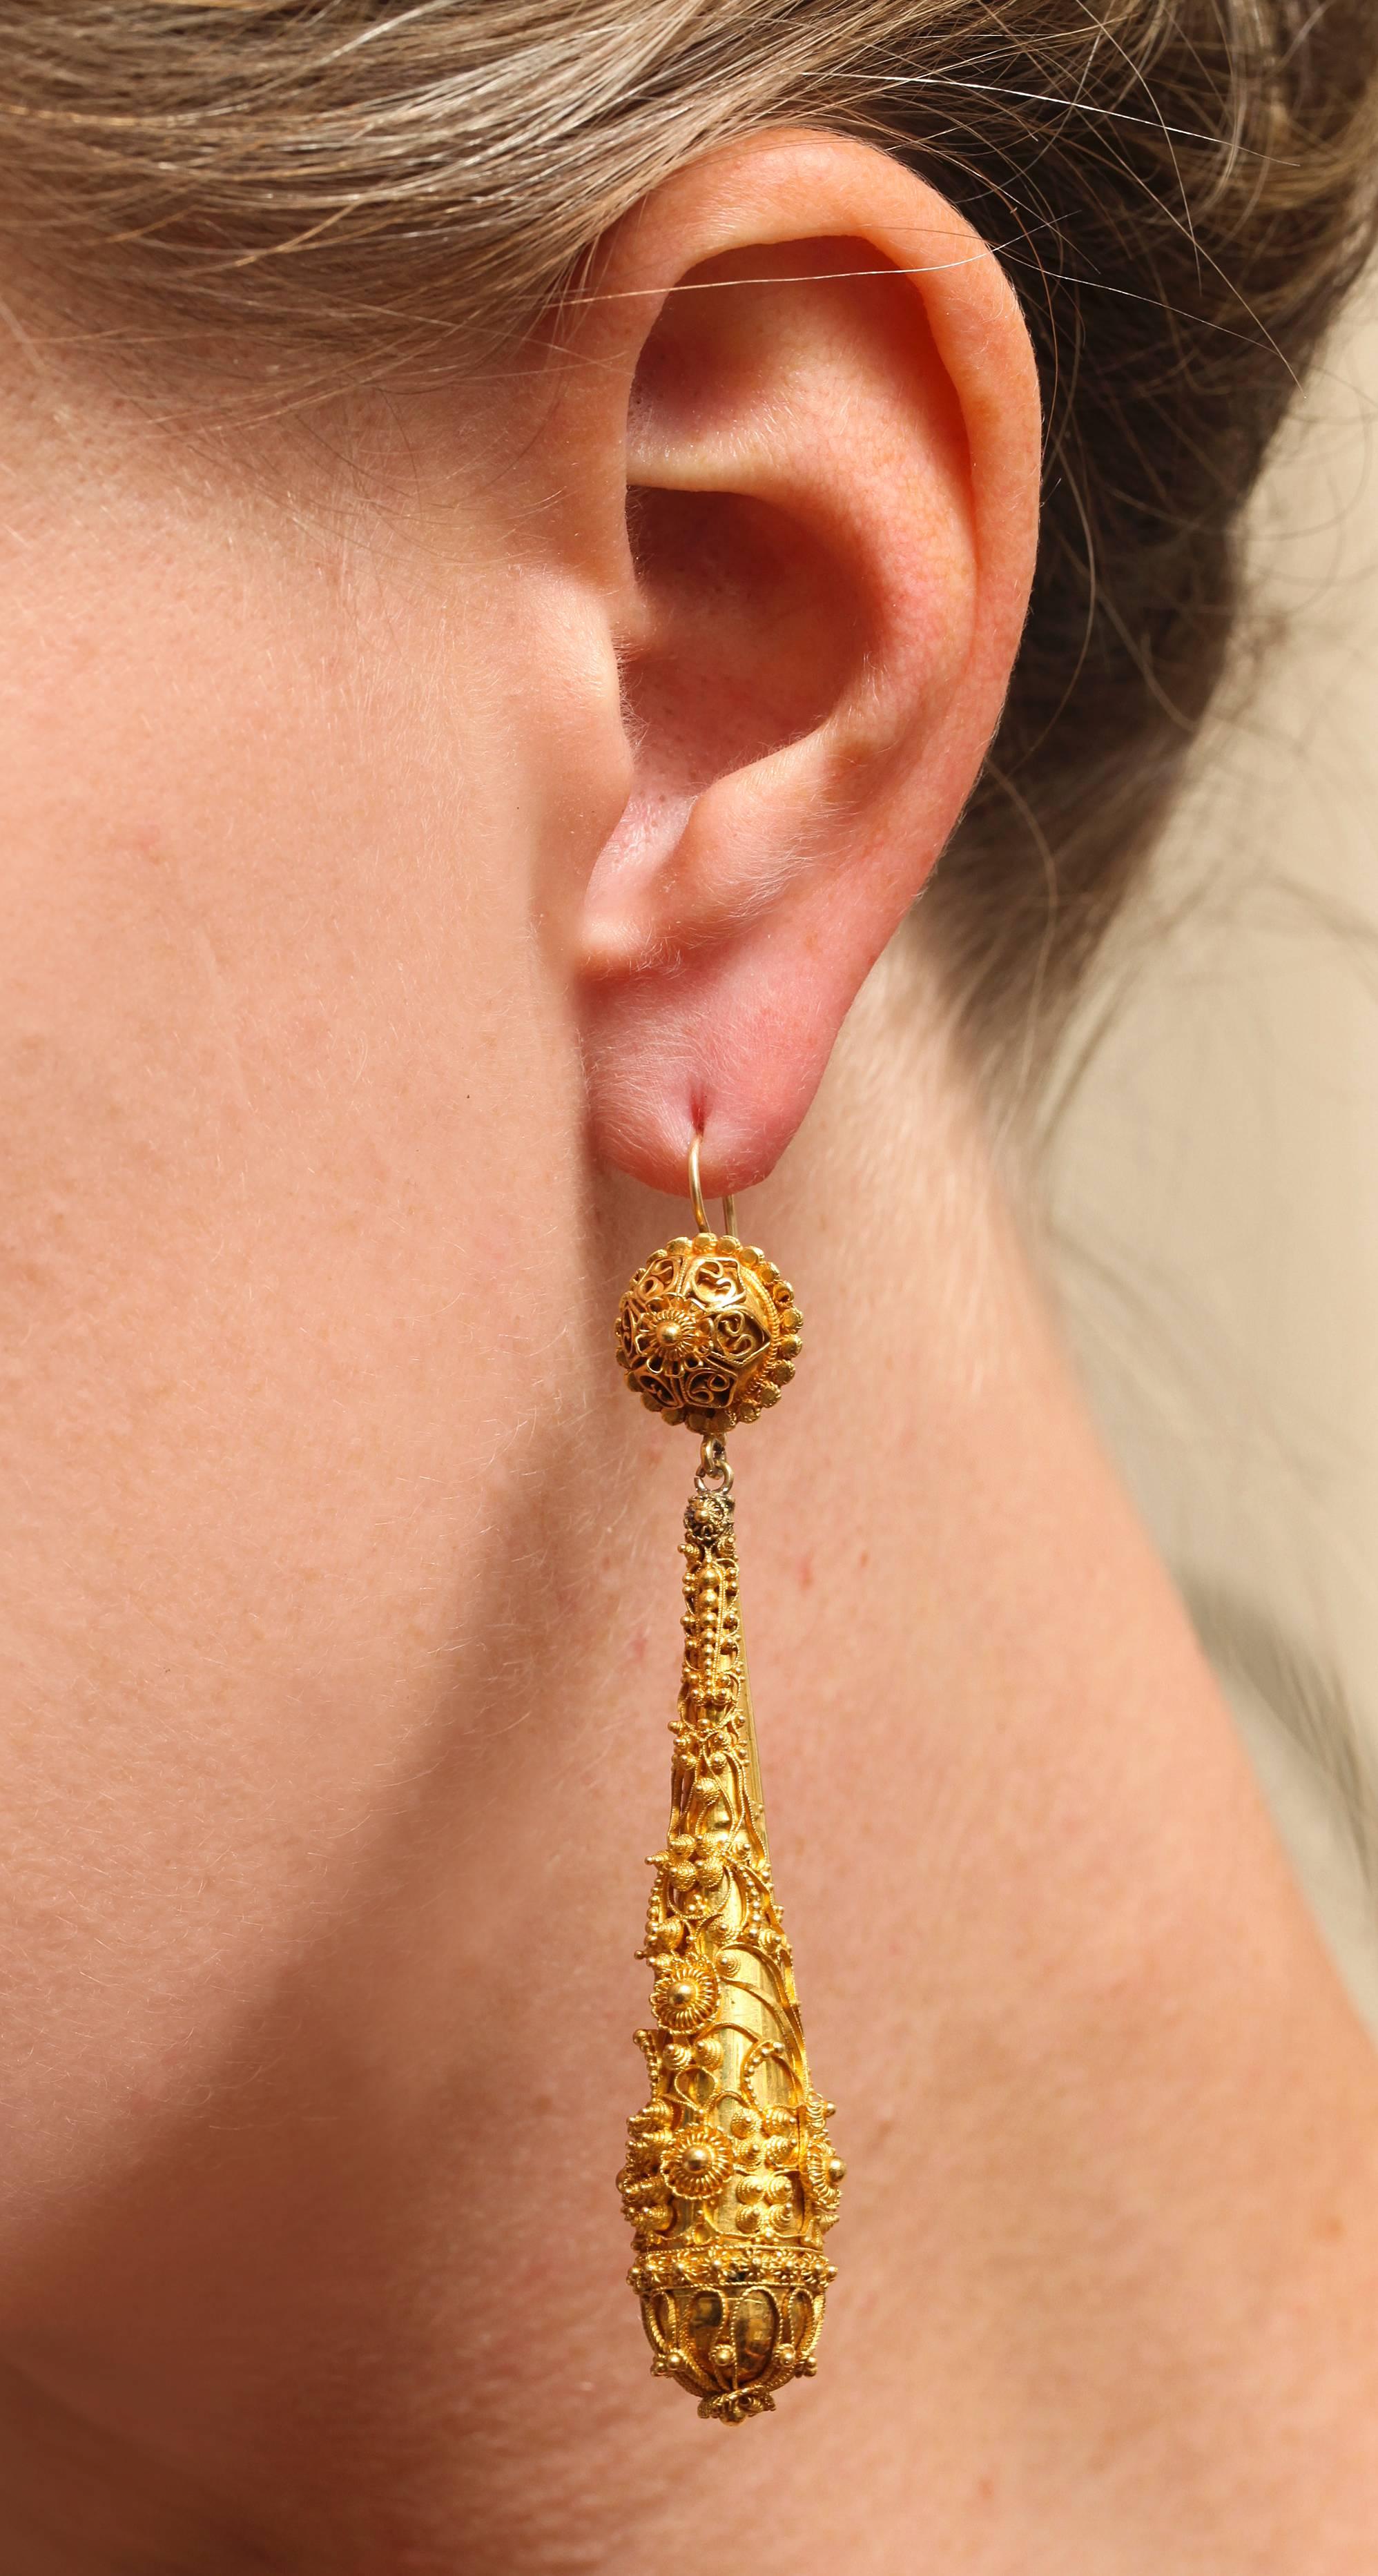 Admirable hand work was dedicated to the construction of these gold encrusted Georgian earrings witnessed by  granulation, cannetille, ropes, flowers, loops and coils.  The jeweler went all out as did my passion for beauty when I found these